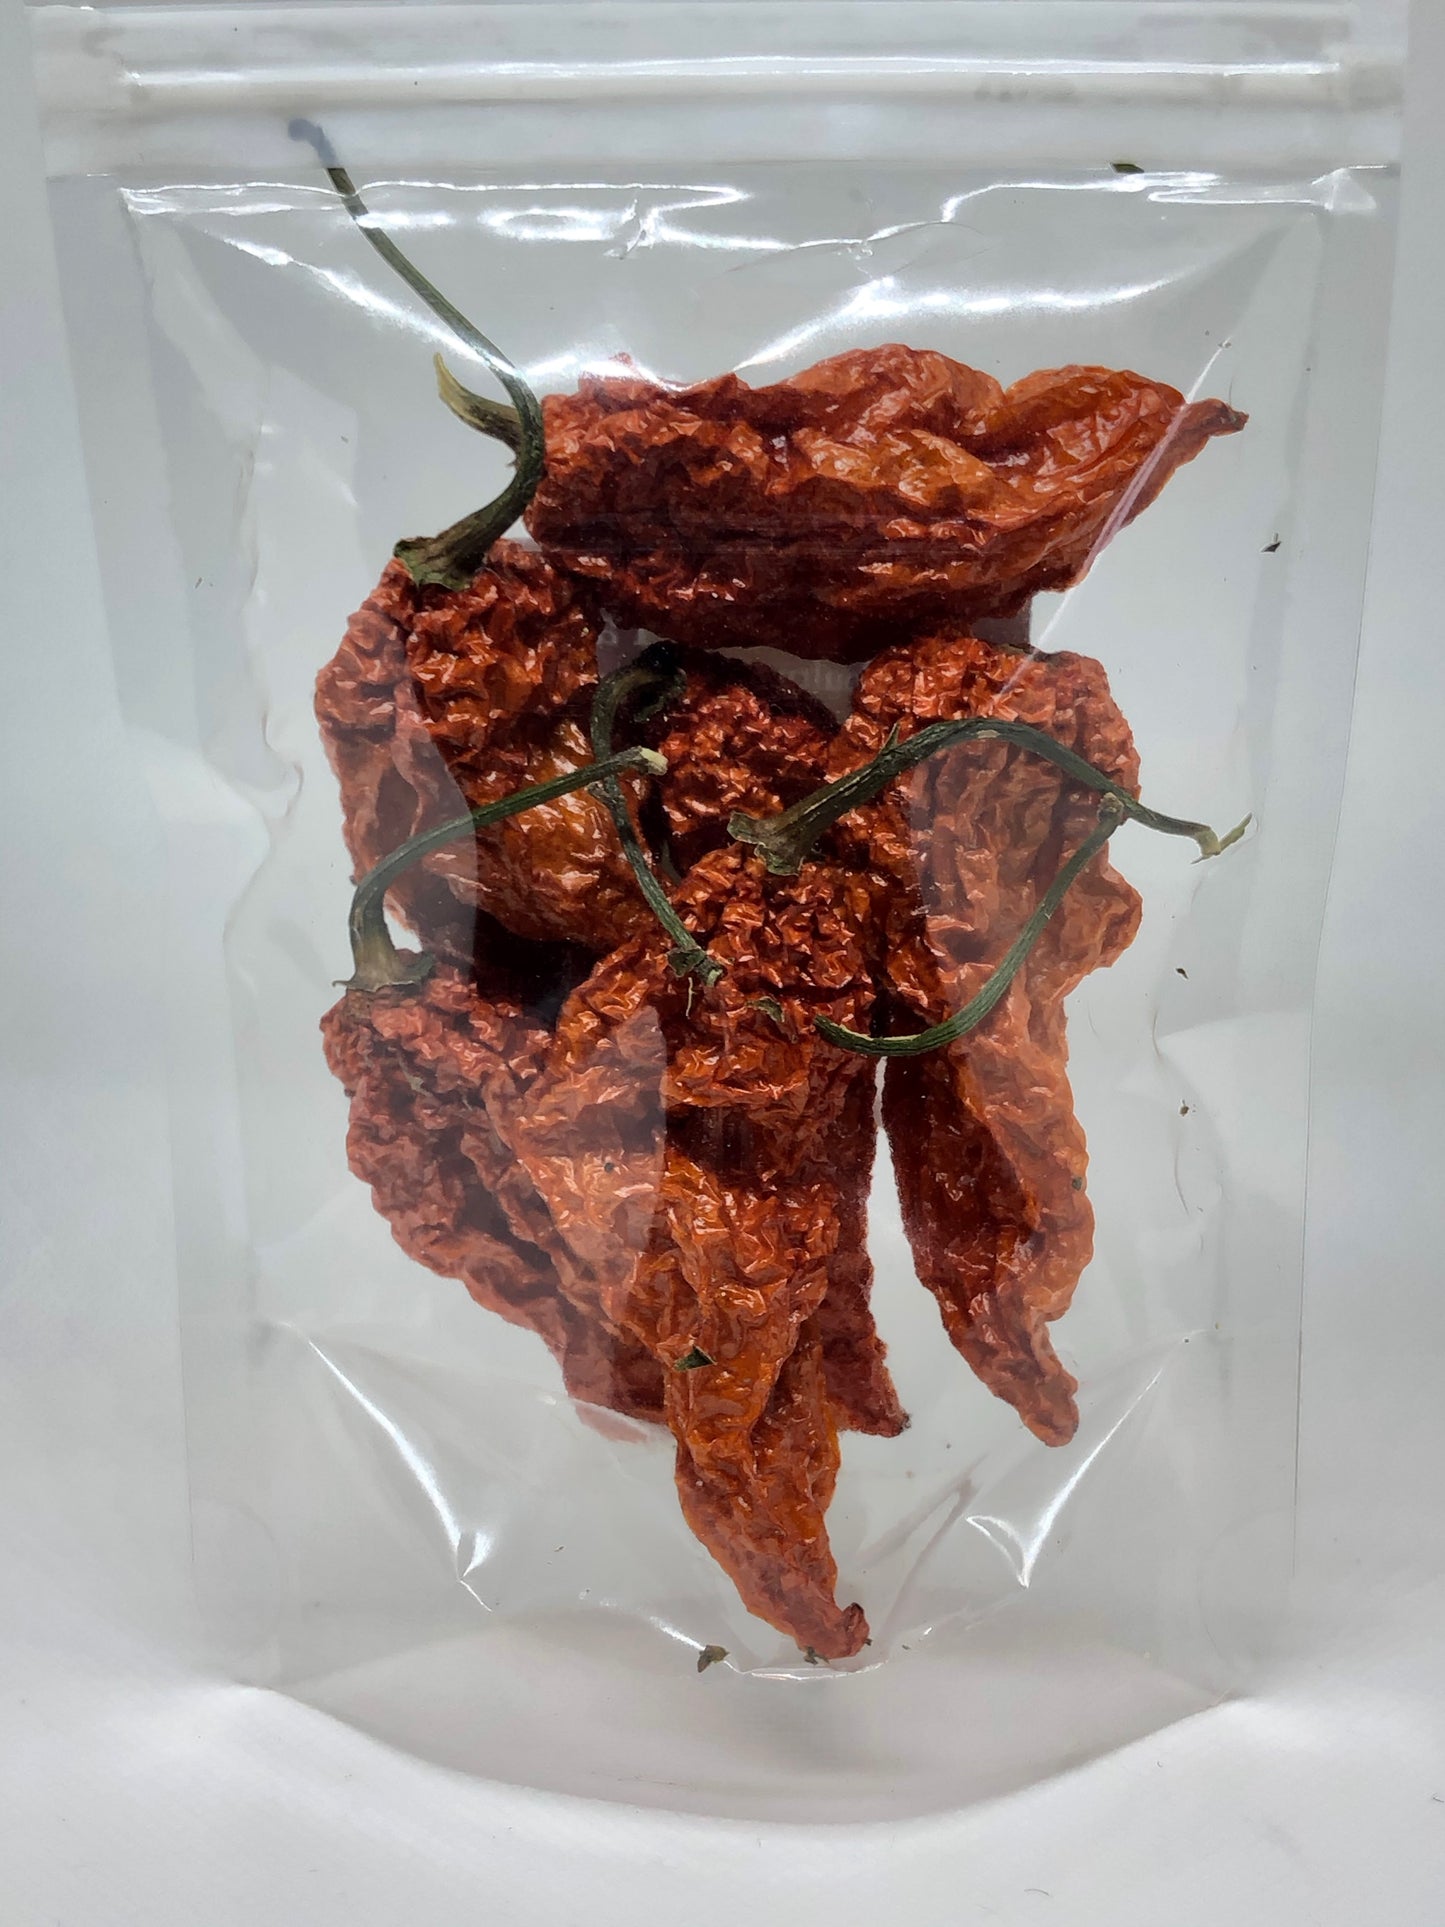 Ghost Peppers Dried